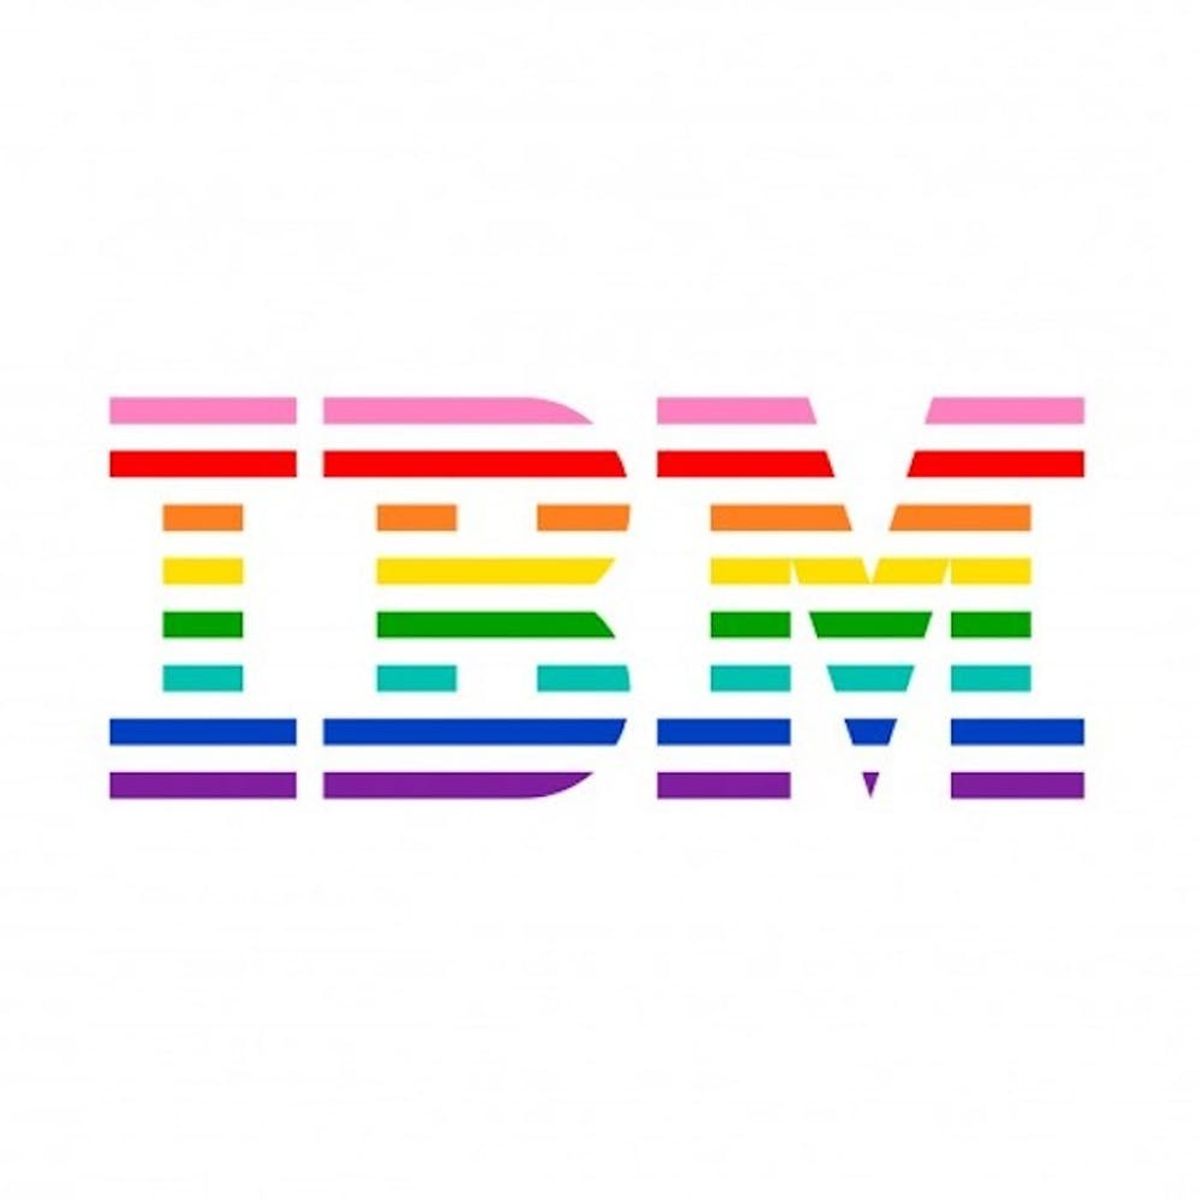 IBM Just Debuted a New Logo and the Reasoning Will Make You Smile